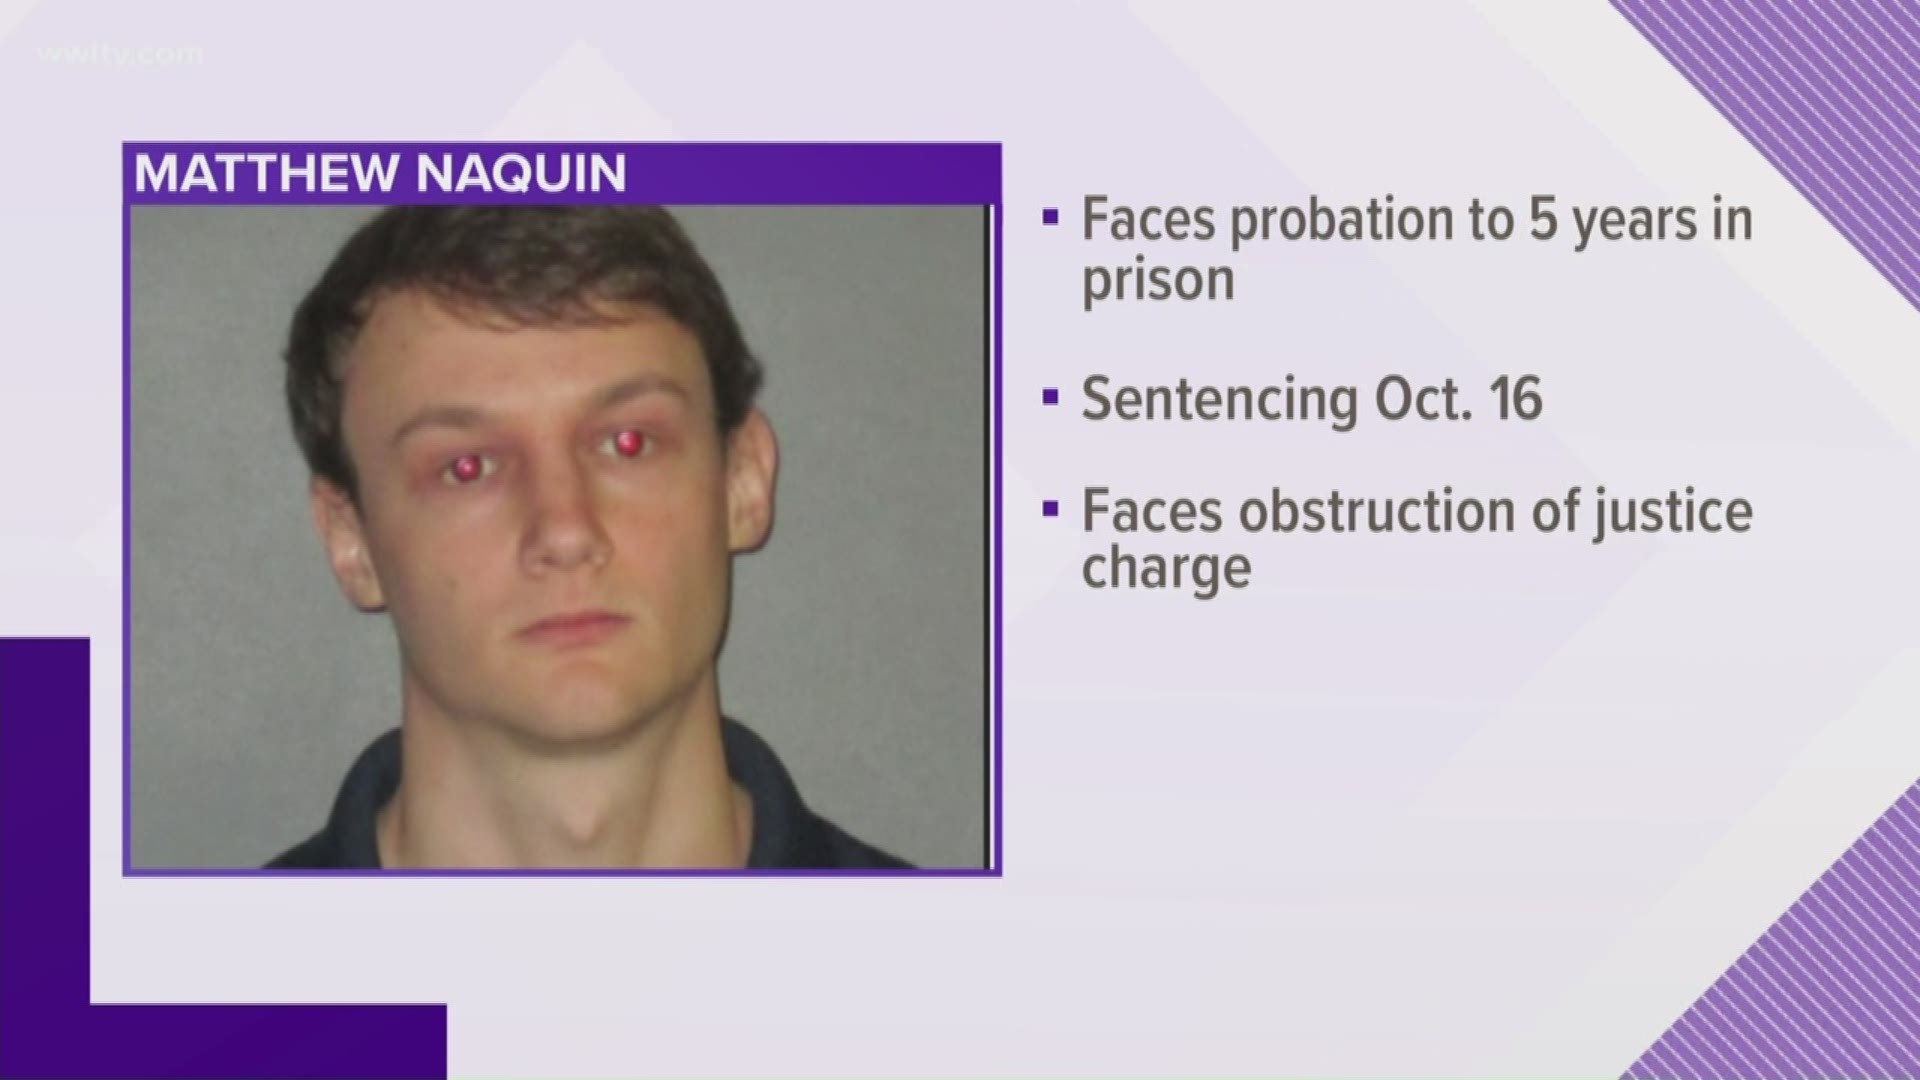 A former LSU student has been found guilty of negligent homicide for his role in the hazing death of a pledge in 2017. His sentencing is scheduled for October.